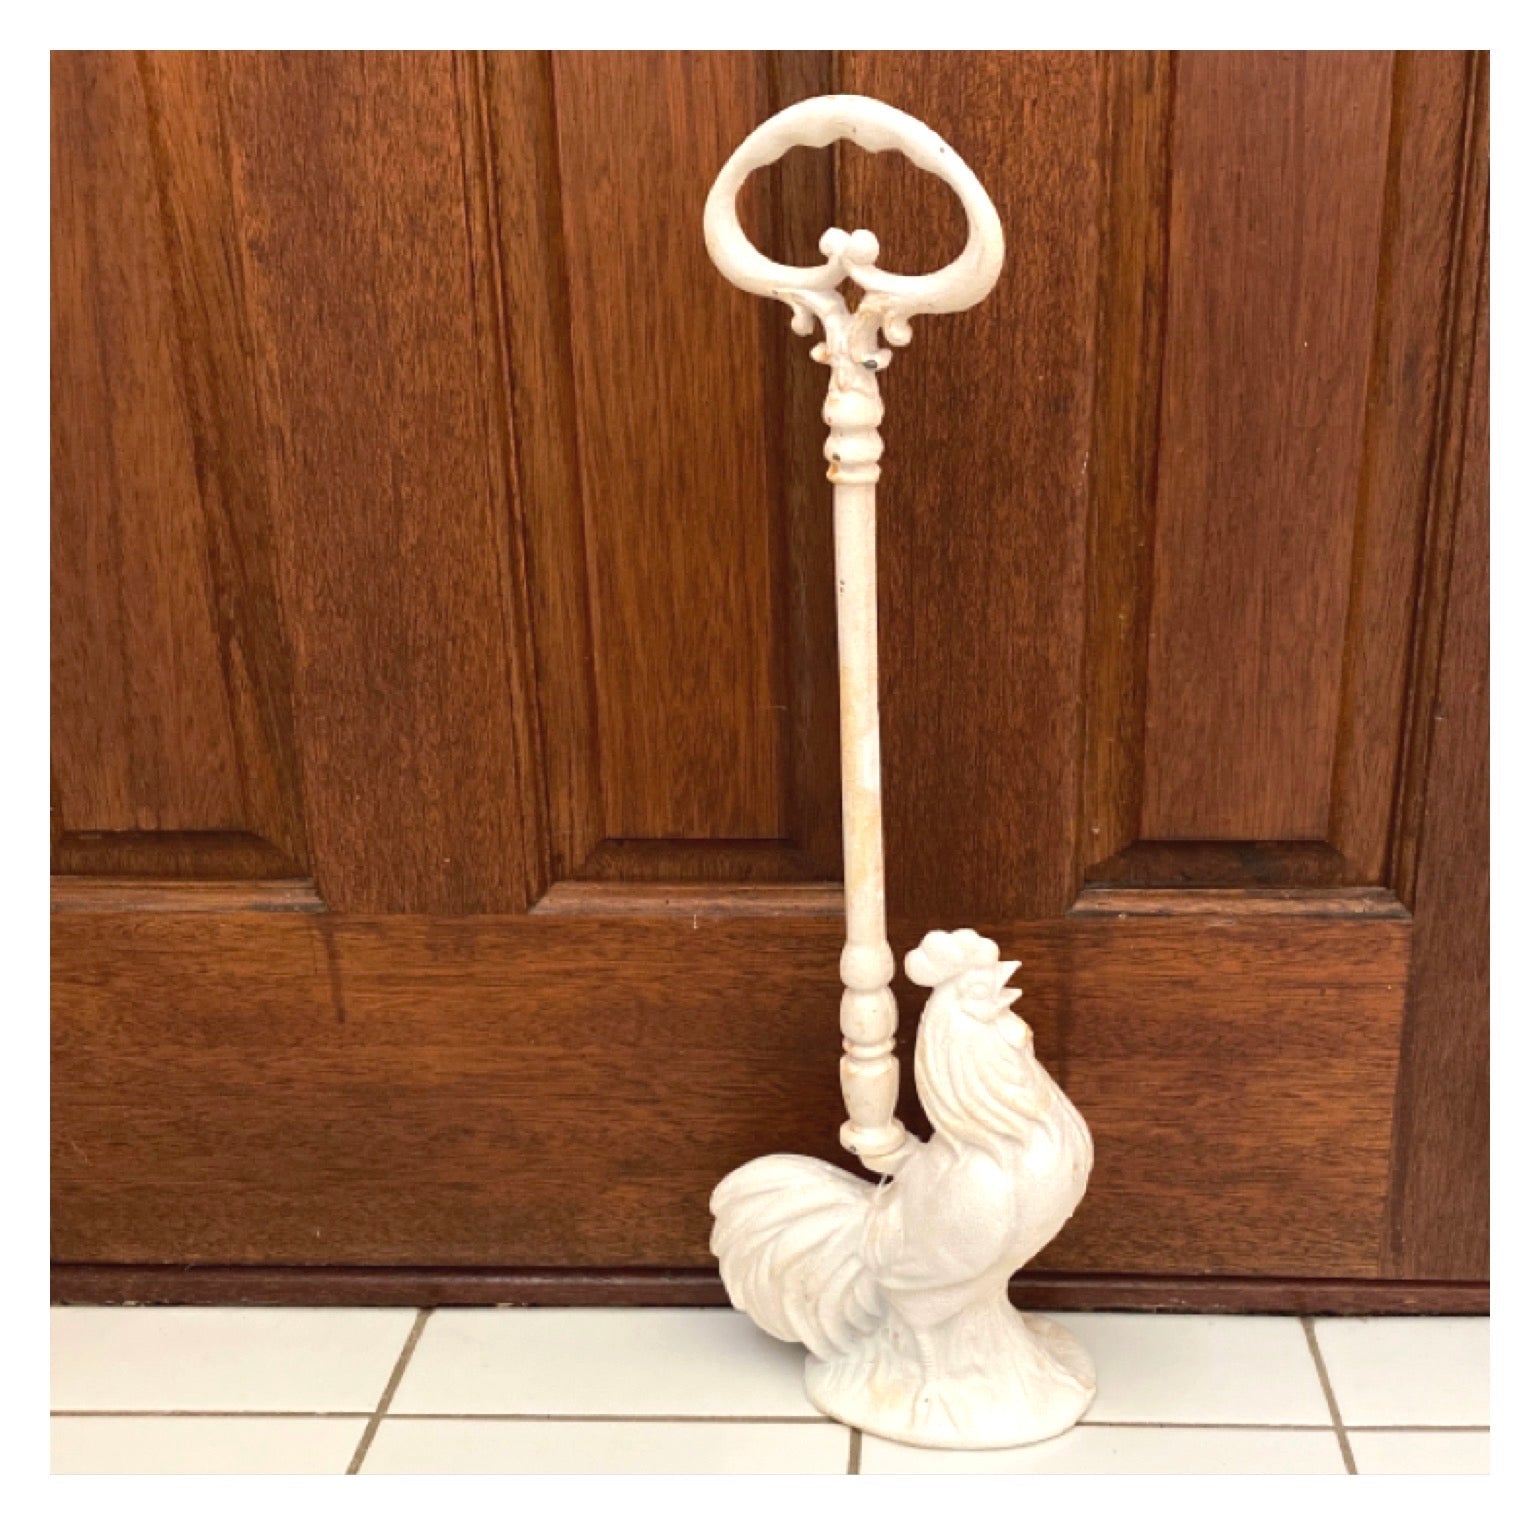 Rooster Rustic Door Stop Stopper with Handle - The Renmy Store Homewares & Gifts 